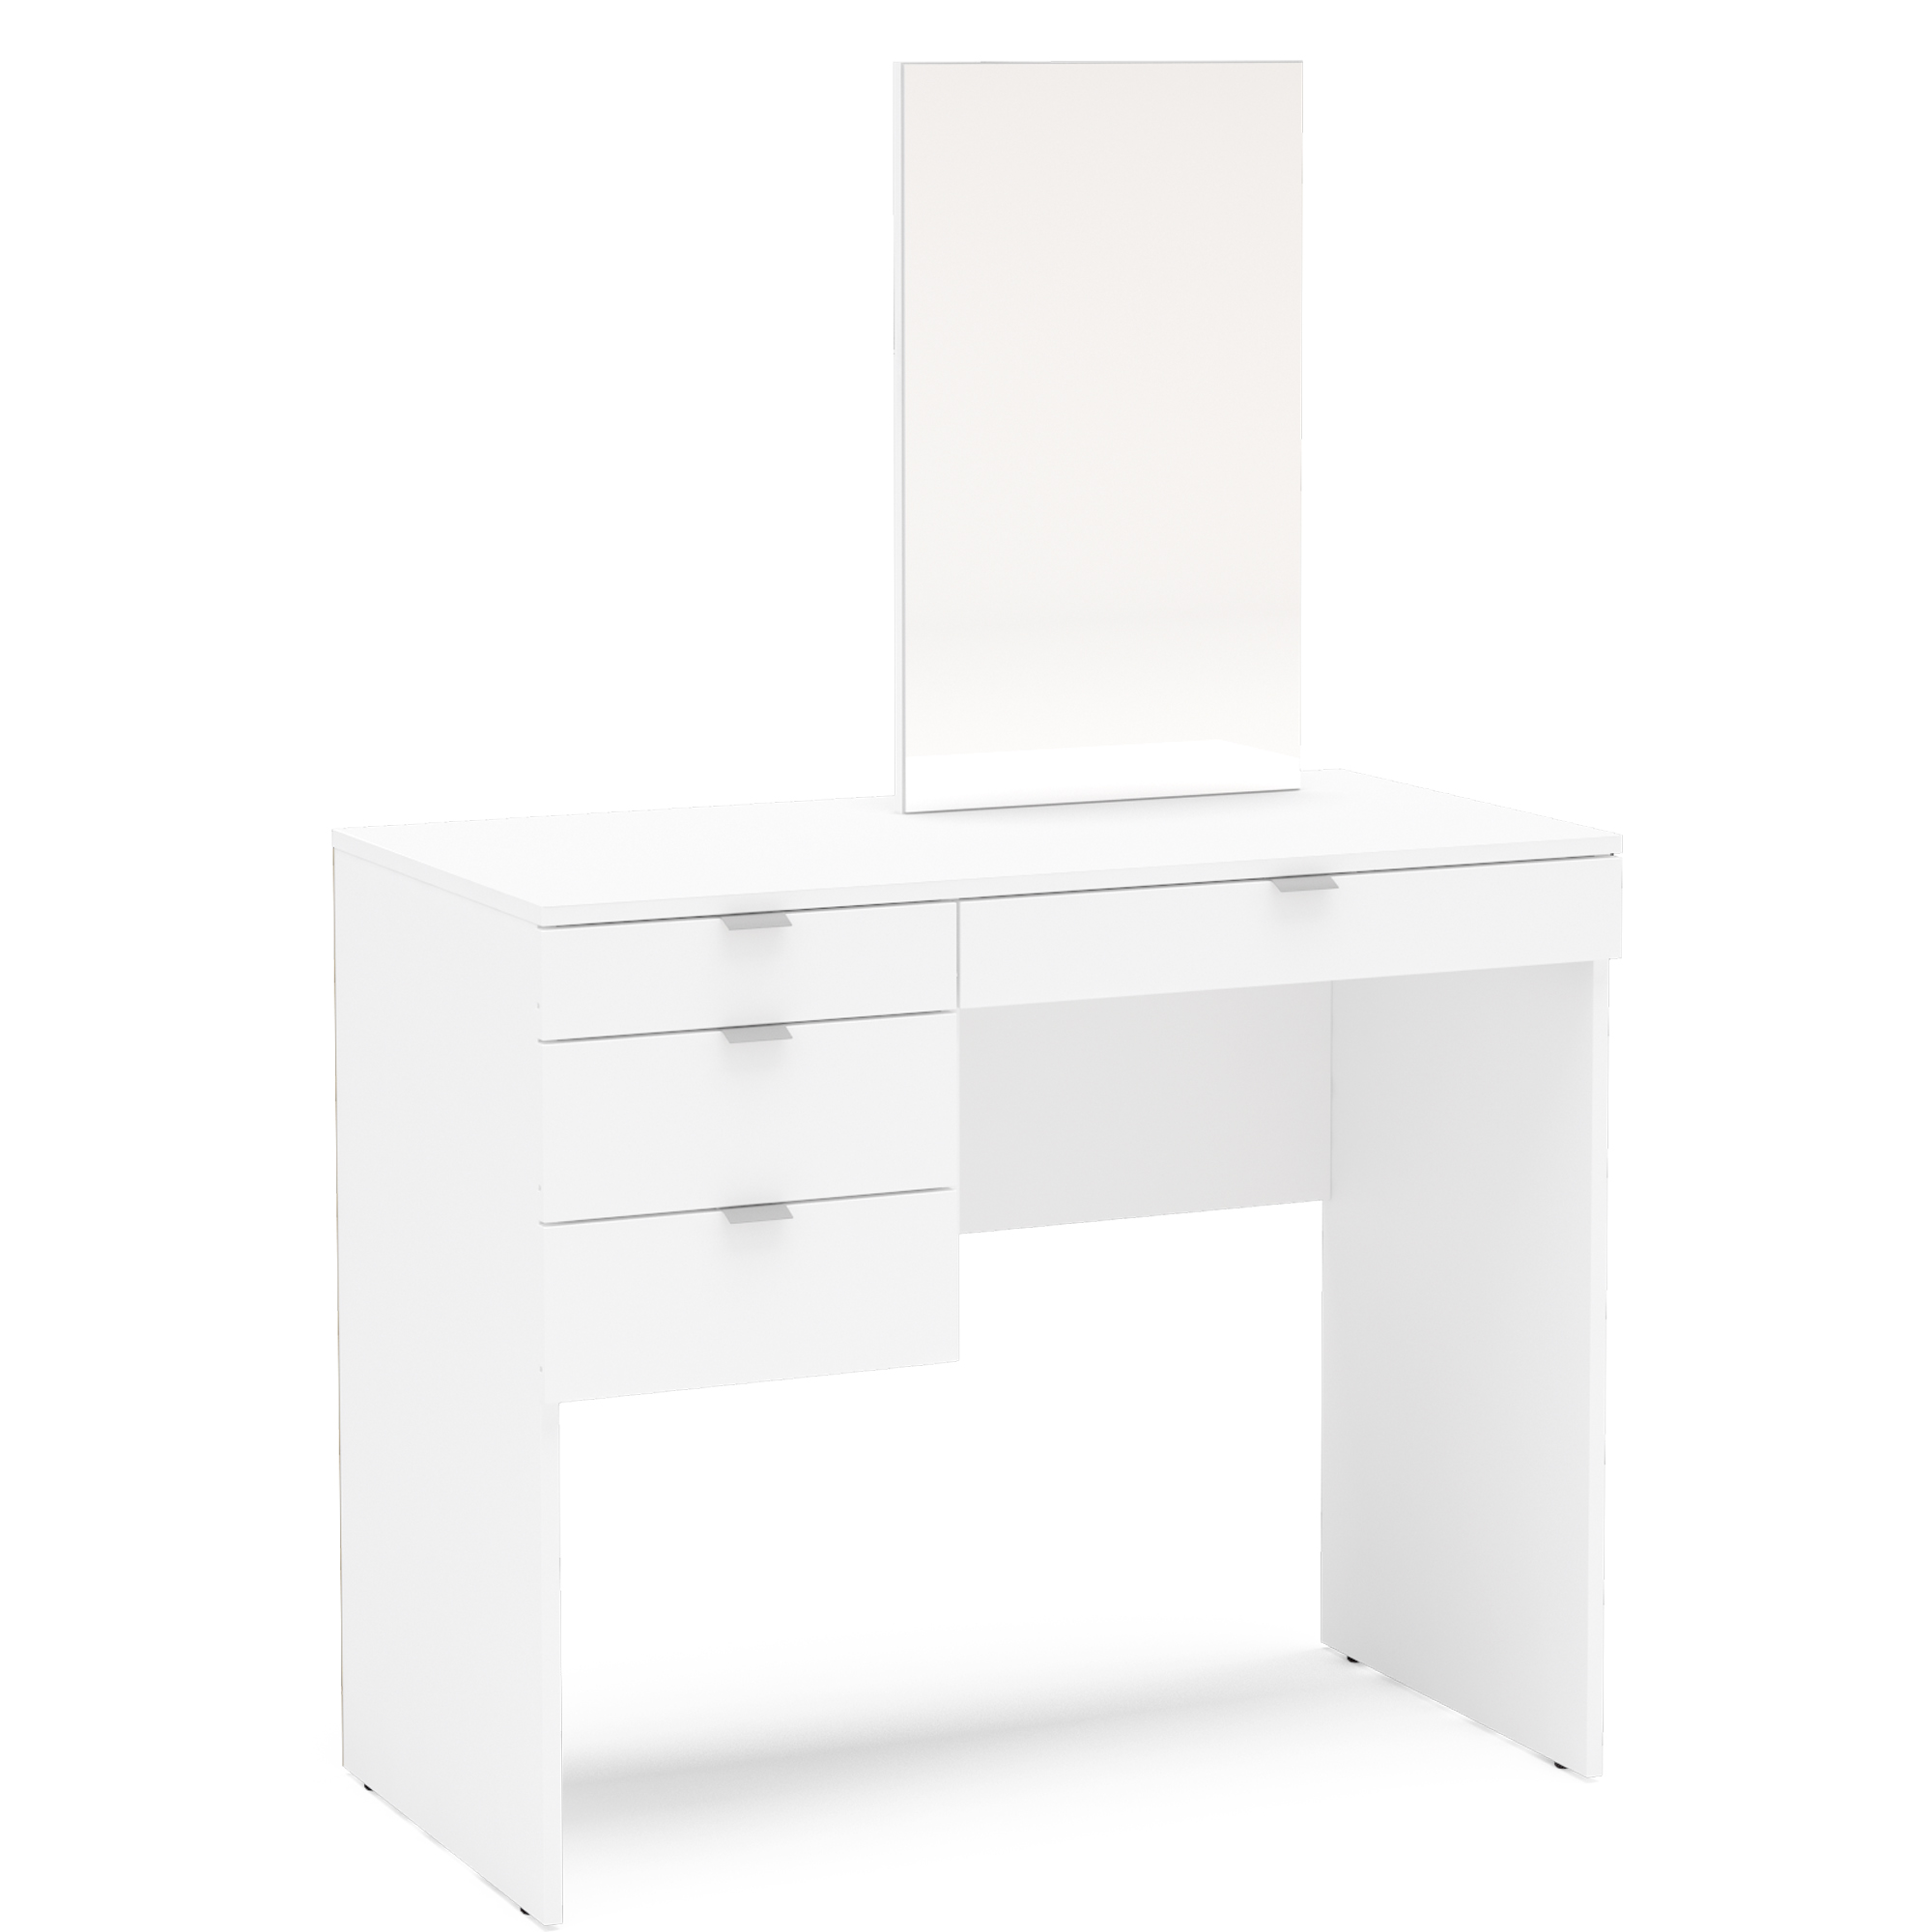 Boahaus Maia Modern Vanity Table, White Finish, for Bedroom - image 5 of 9